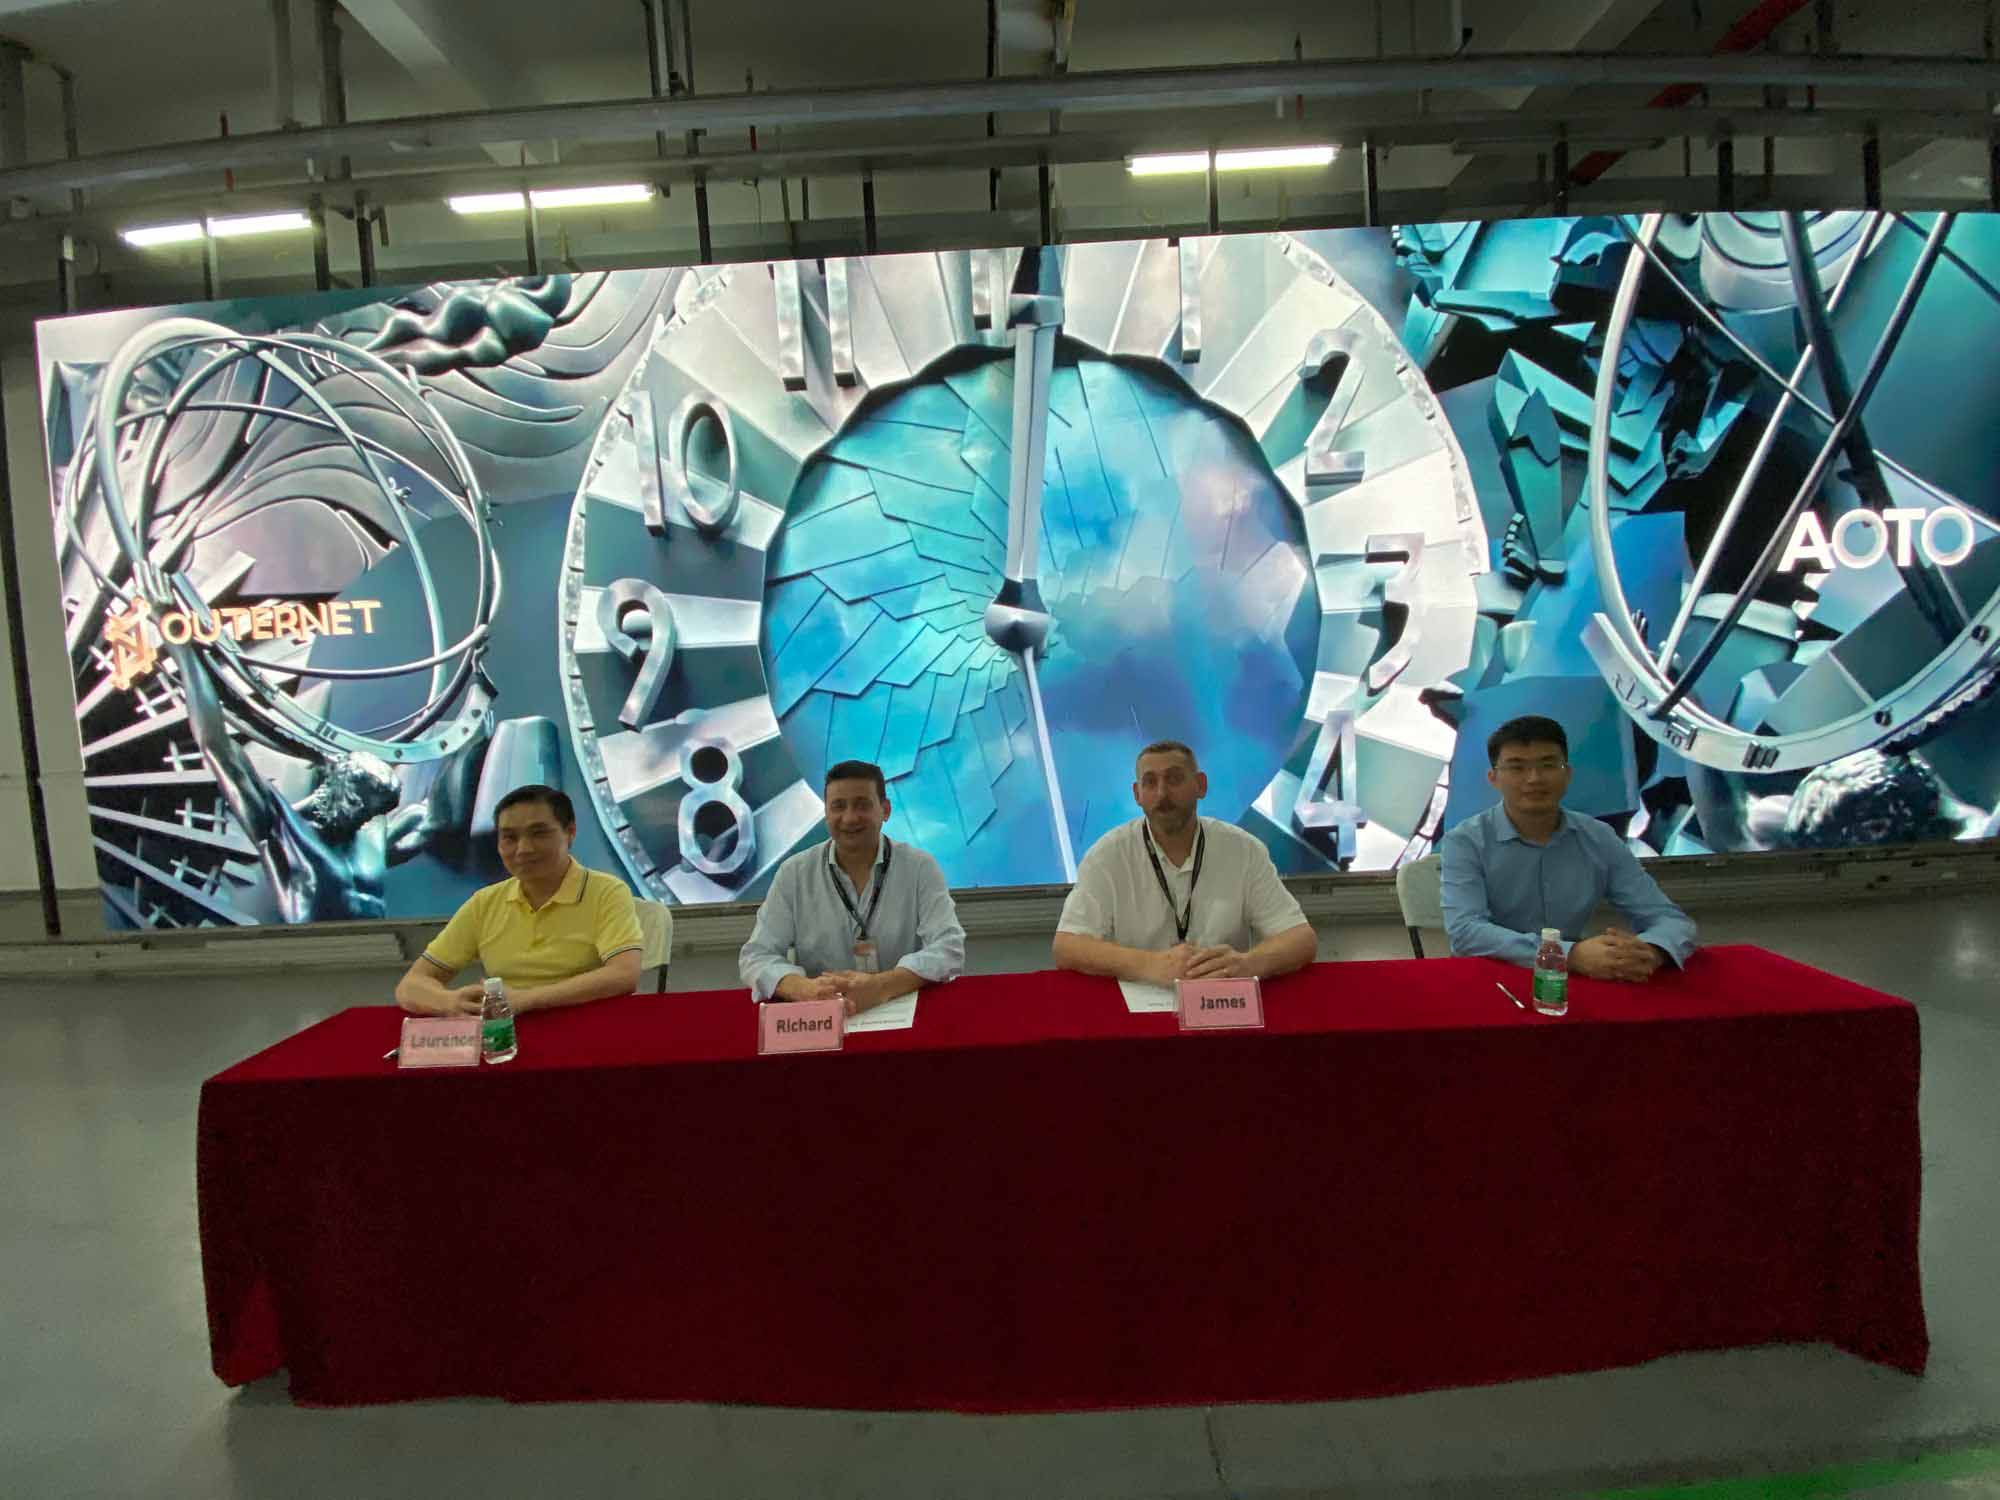 Representatives from Outernet and AOTO sitting at the table